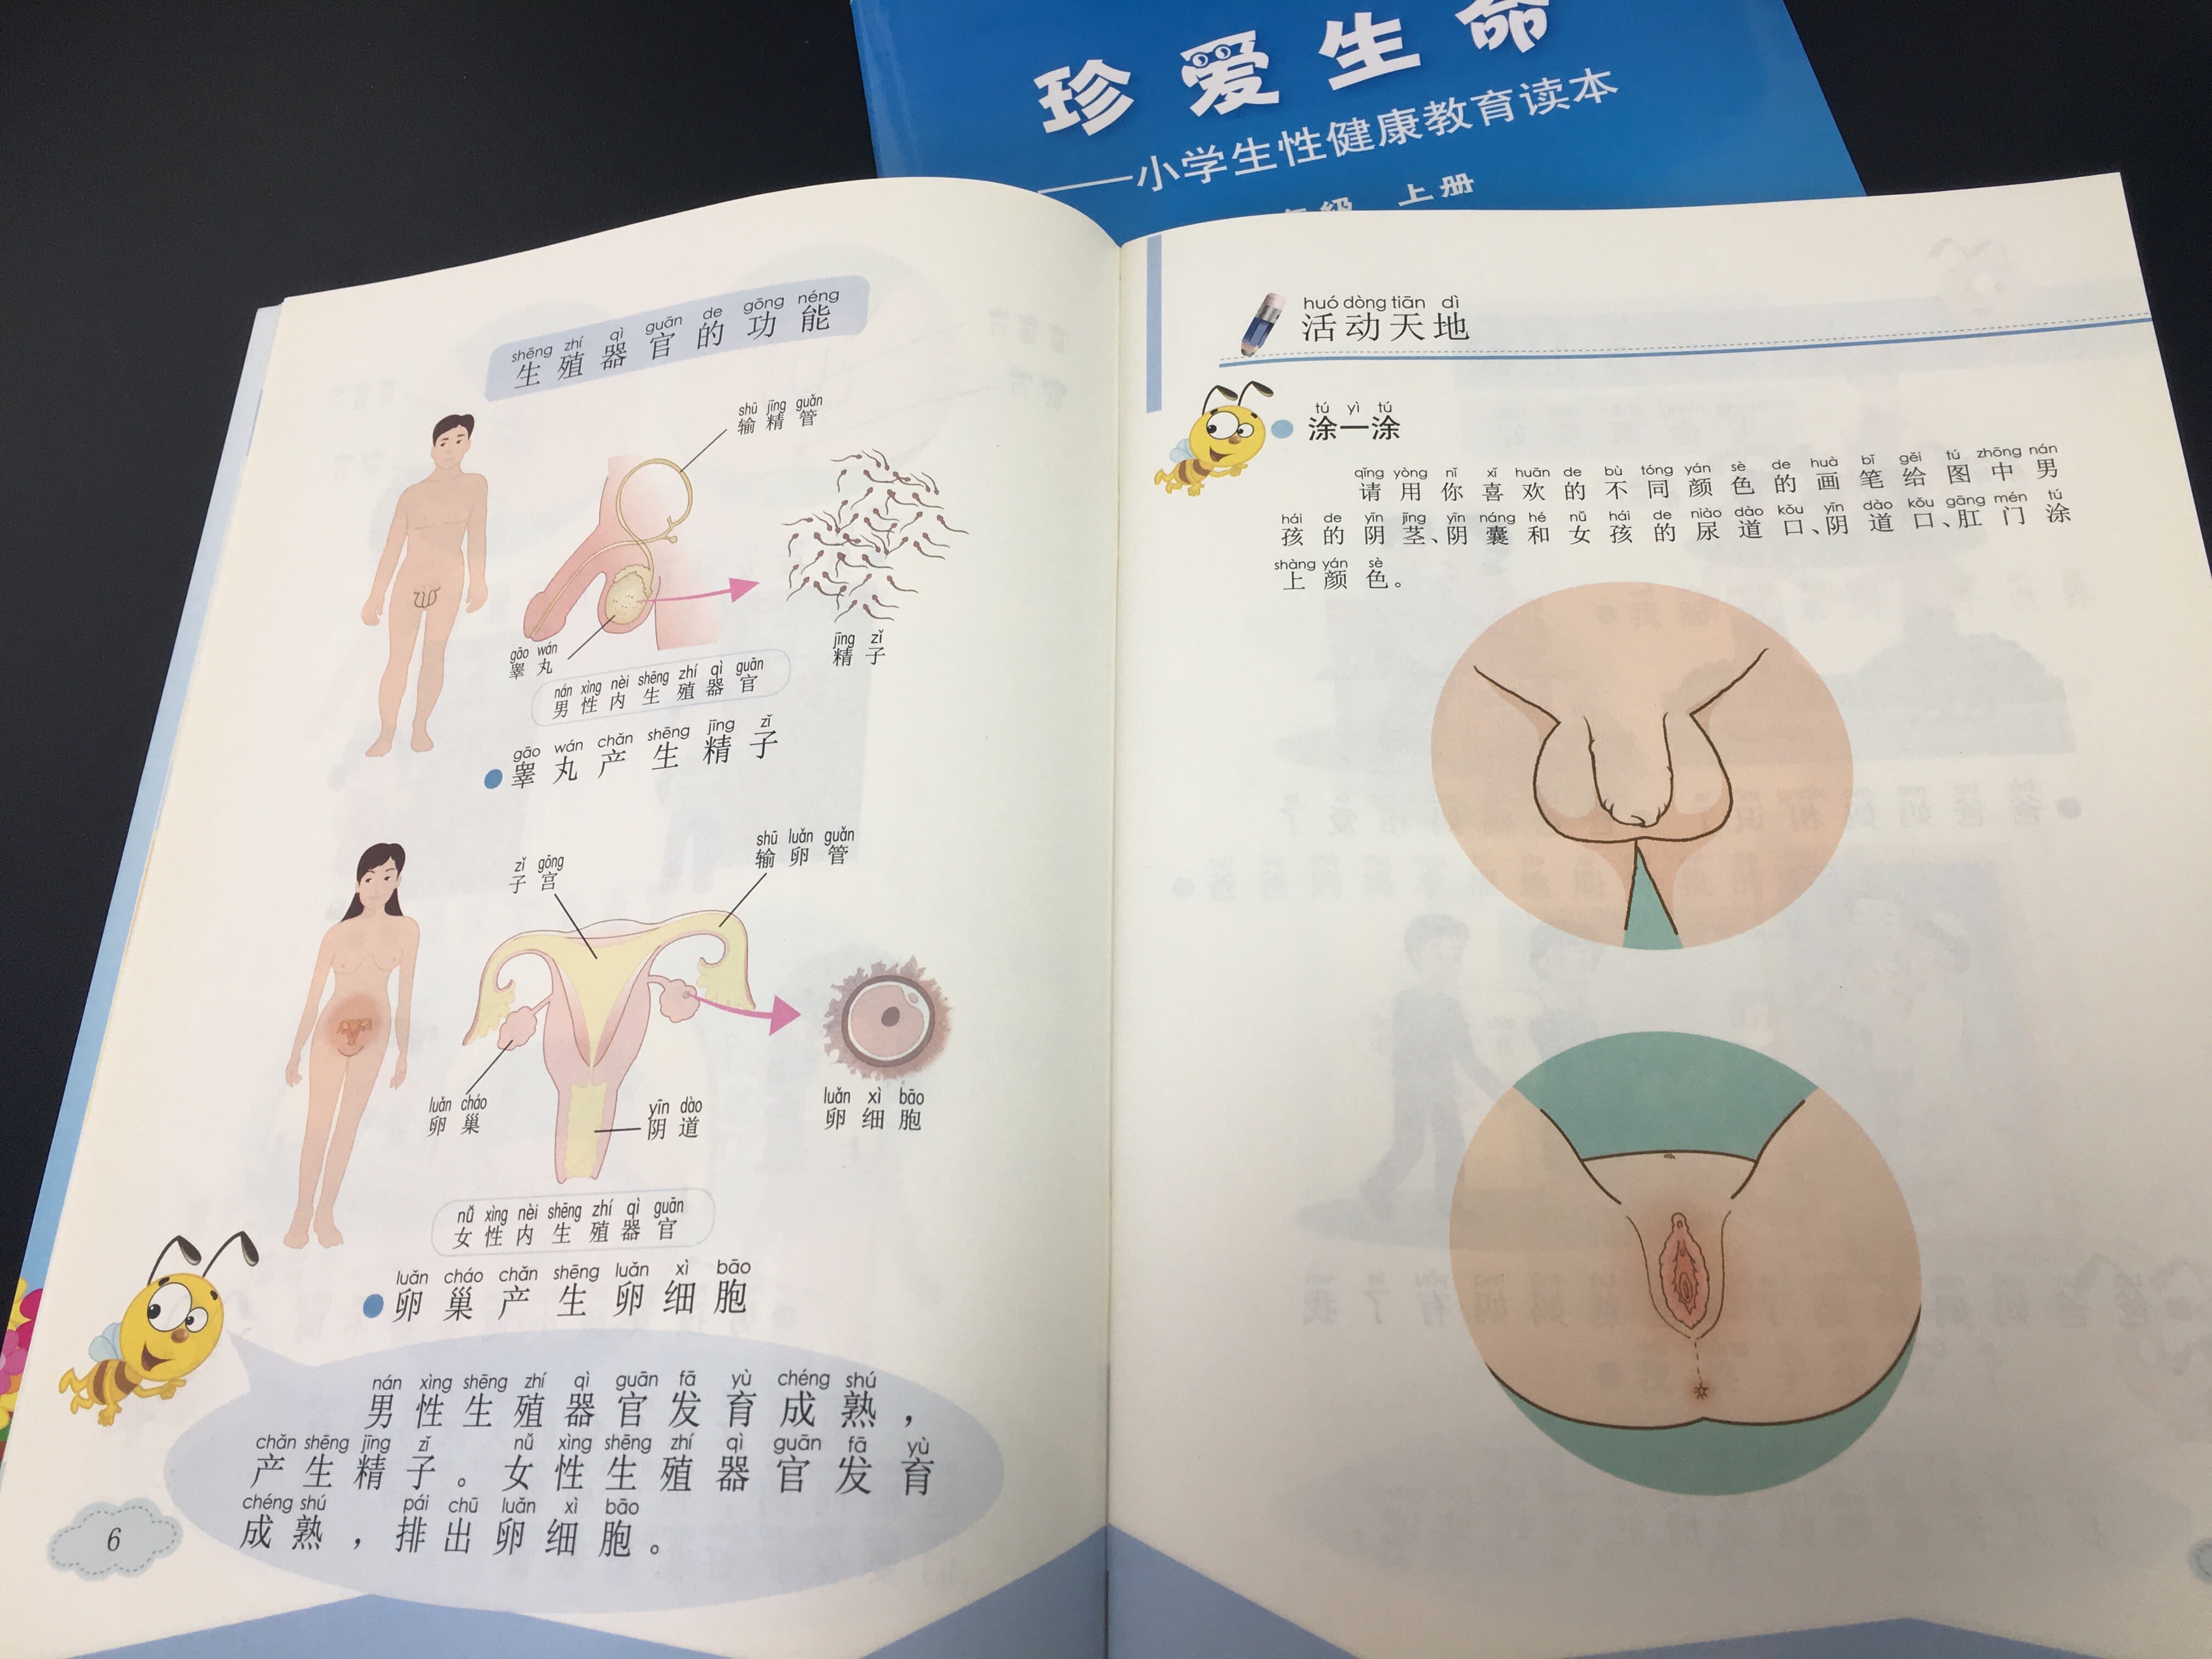 Sex In School Porn - Shock and praise for groundbreaking sex-ed textbook in China | CNN